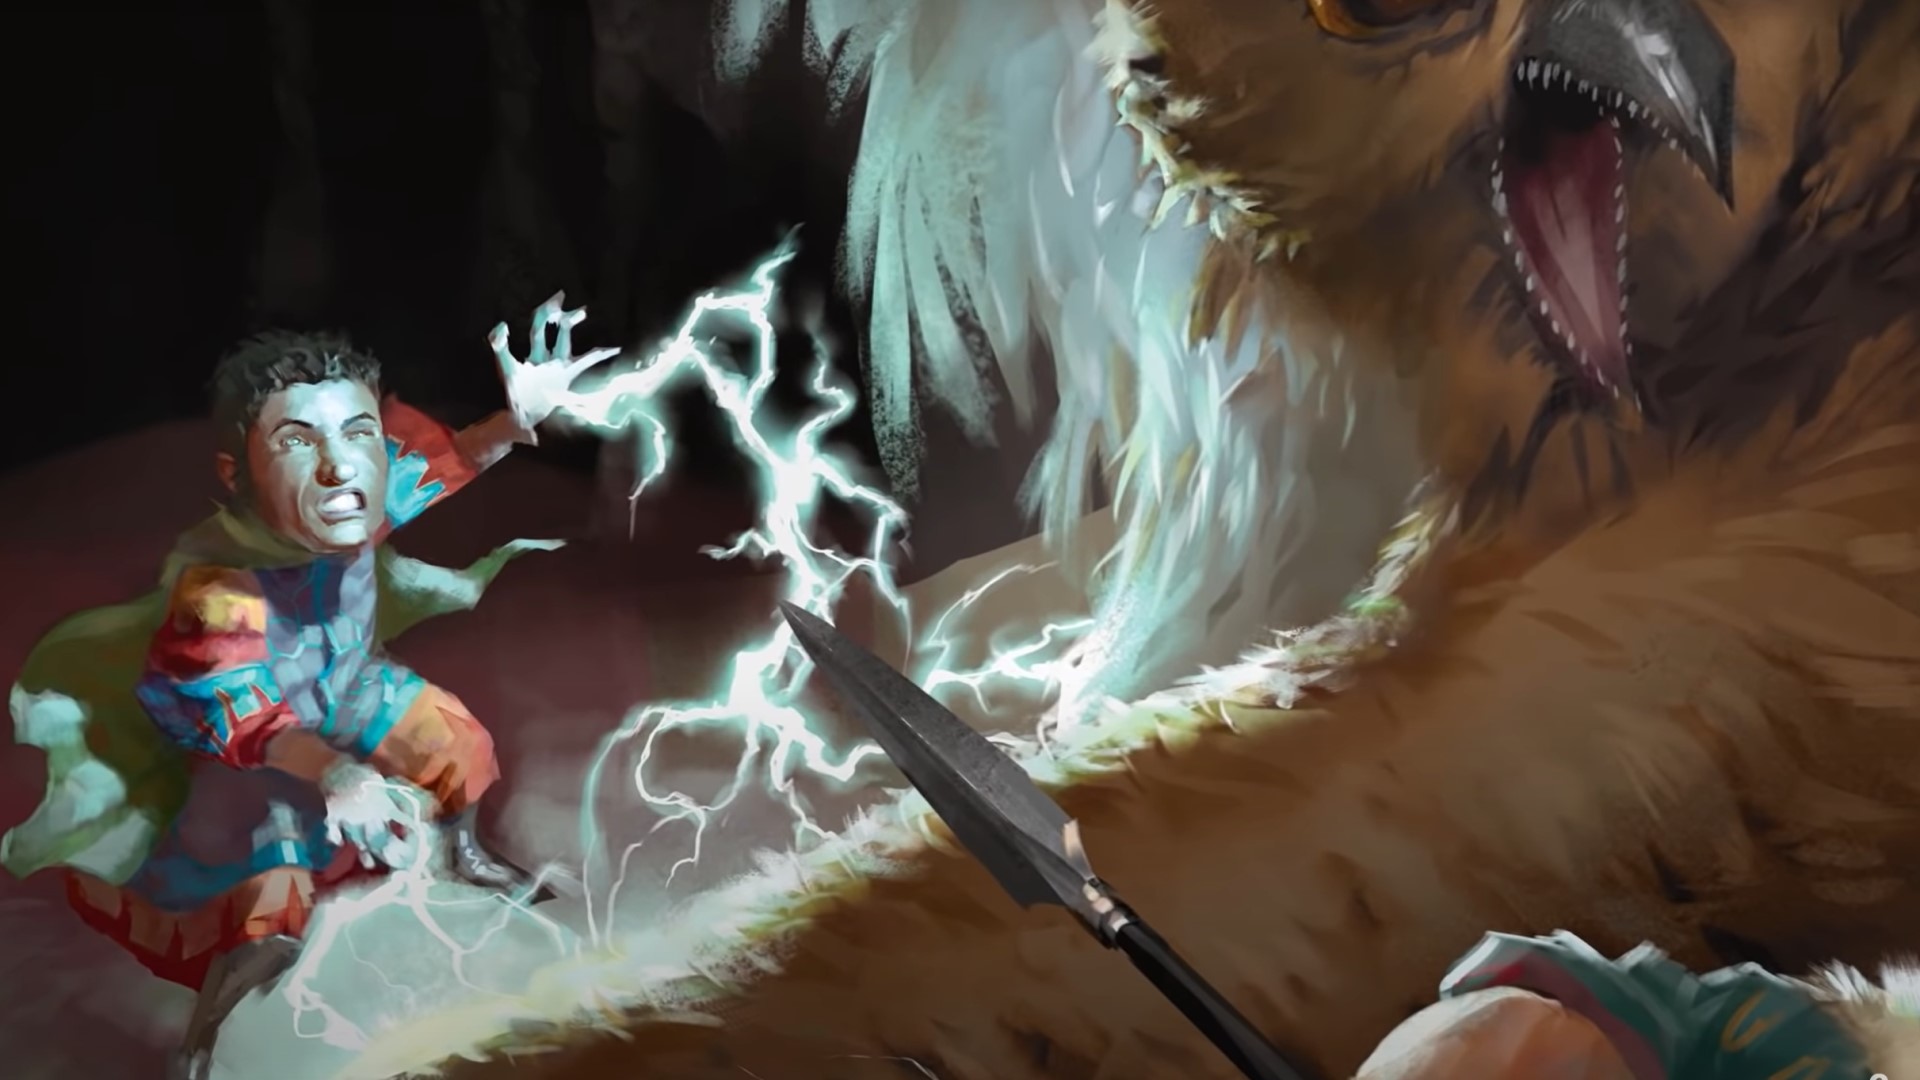 DnD Mind Sliver 5e - Wizards of the Coast art of a gnome spellcaster fighting a monster